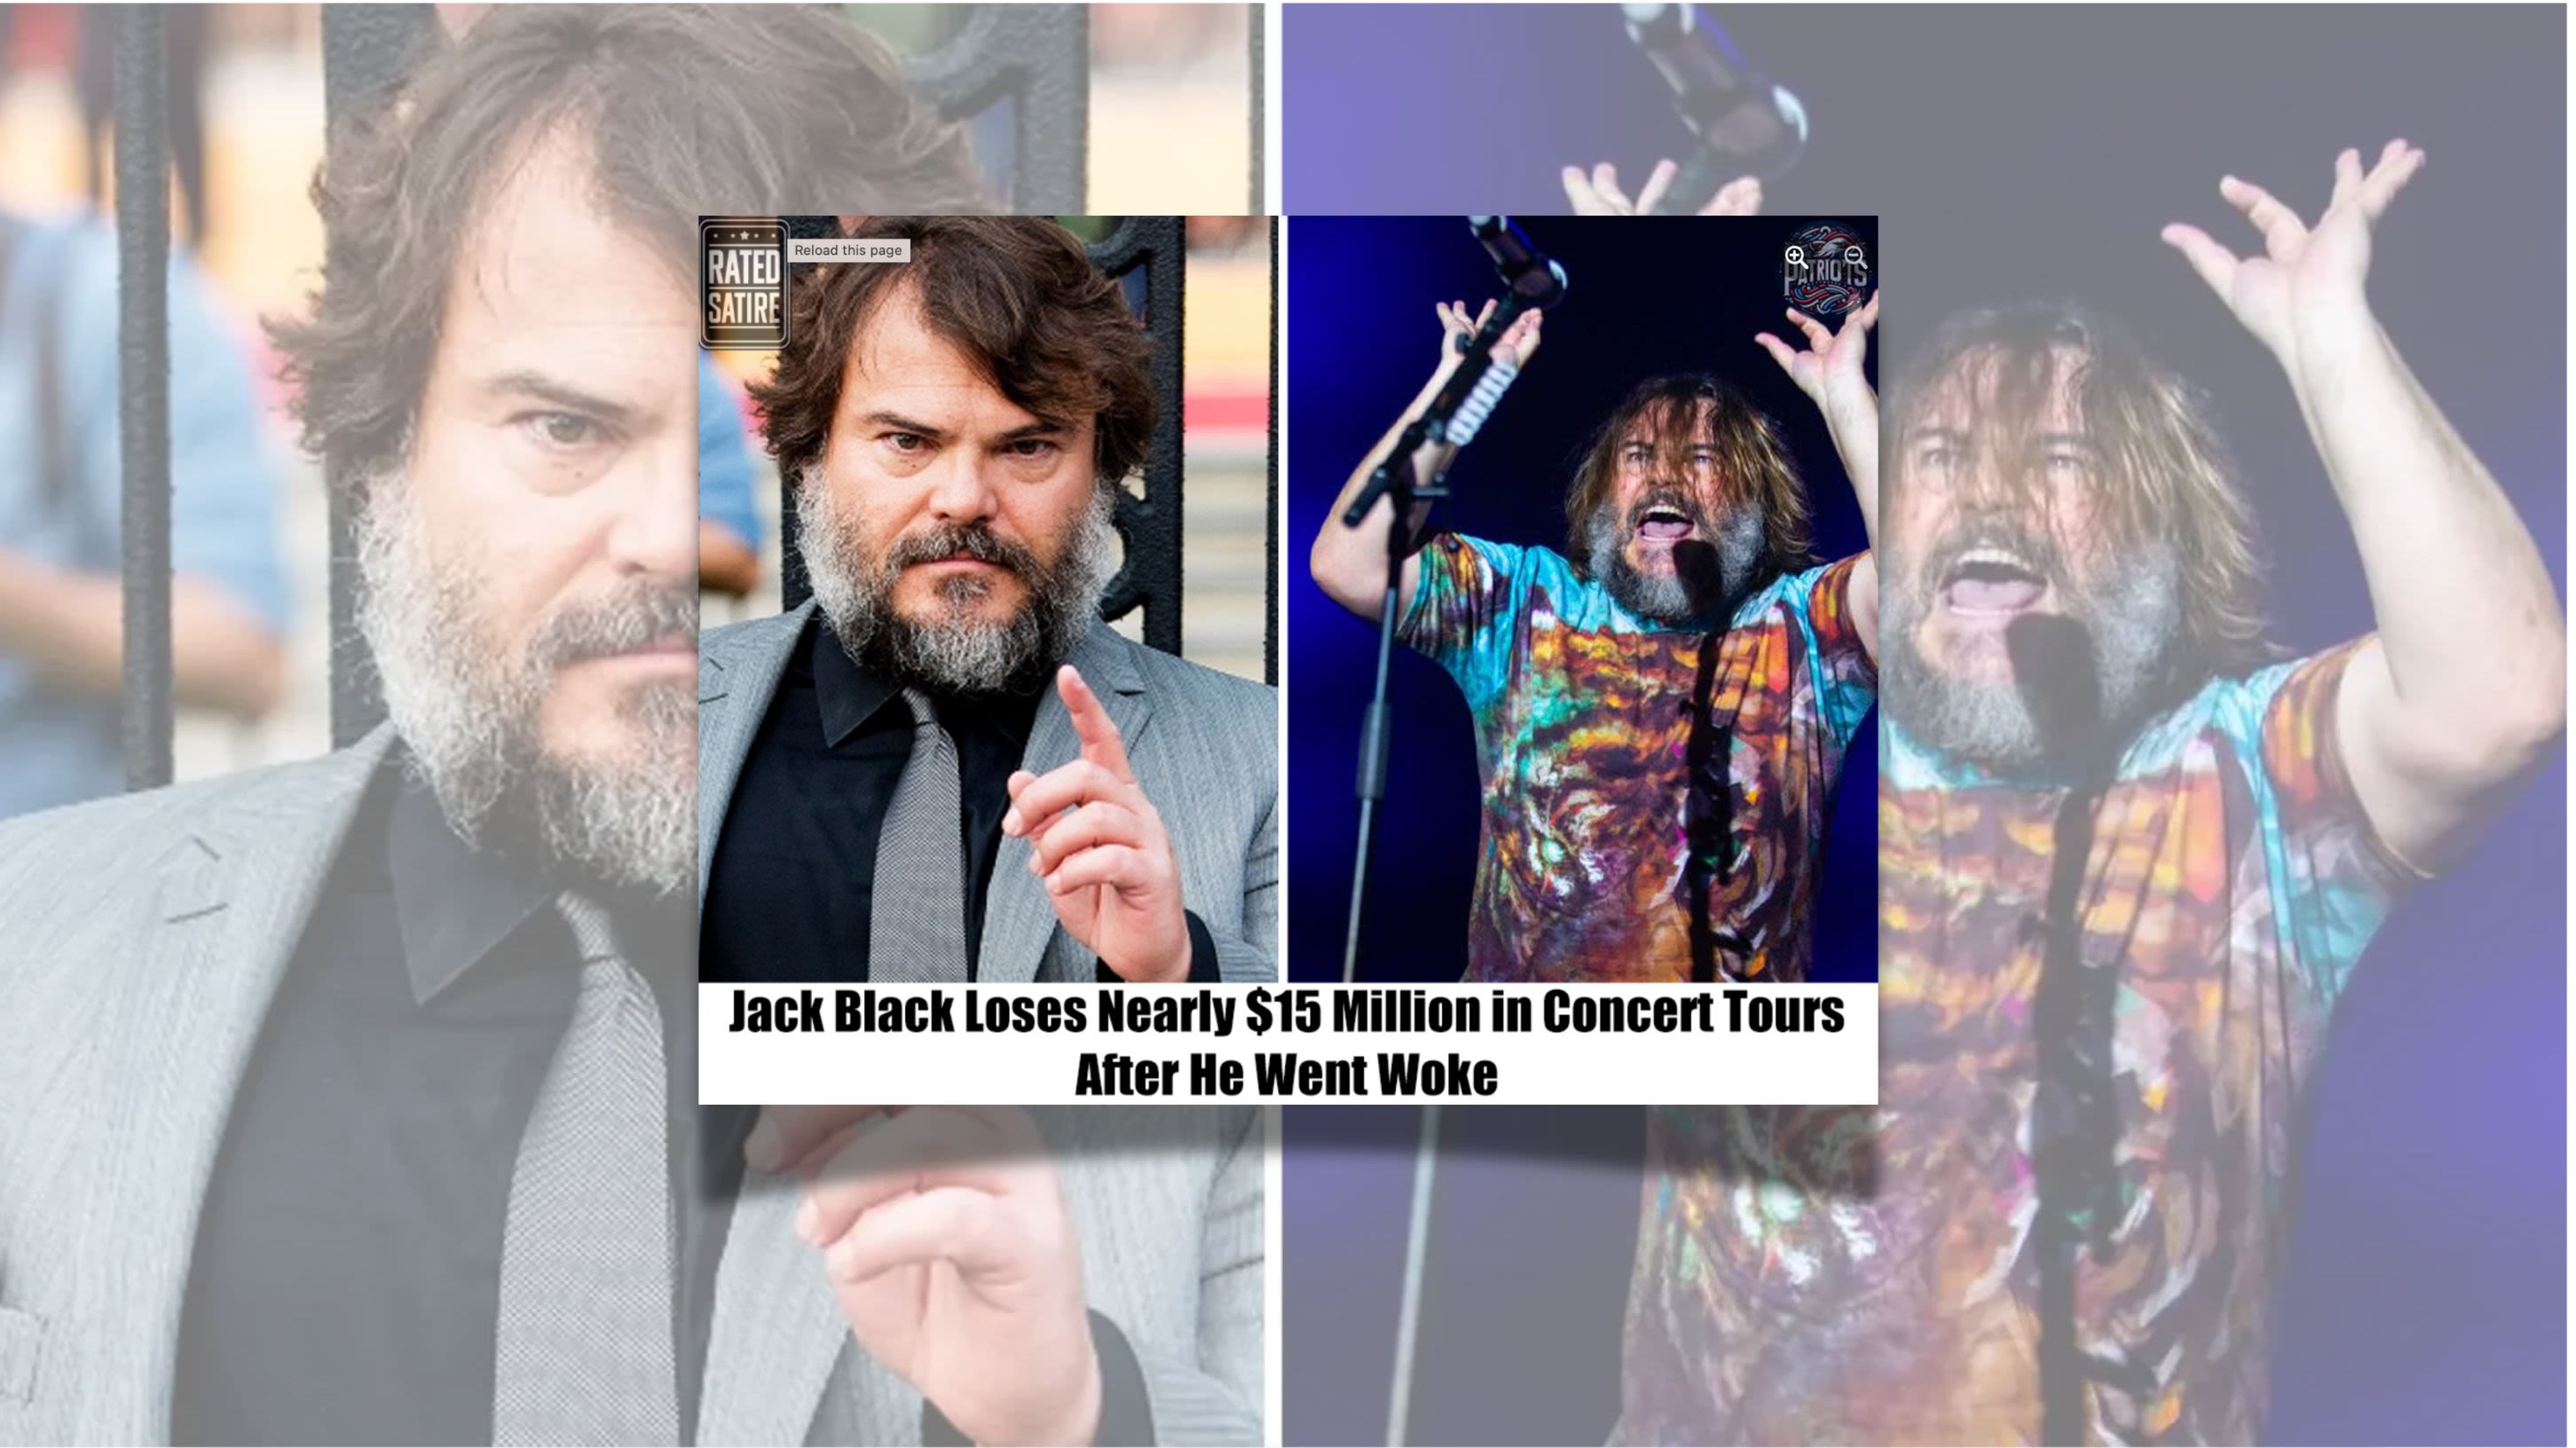 Fact Check: Jack Black Didn't Lose Nearly $15M in Concert Revenue 'After He Went Woke'